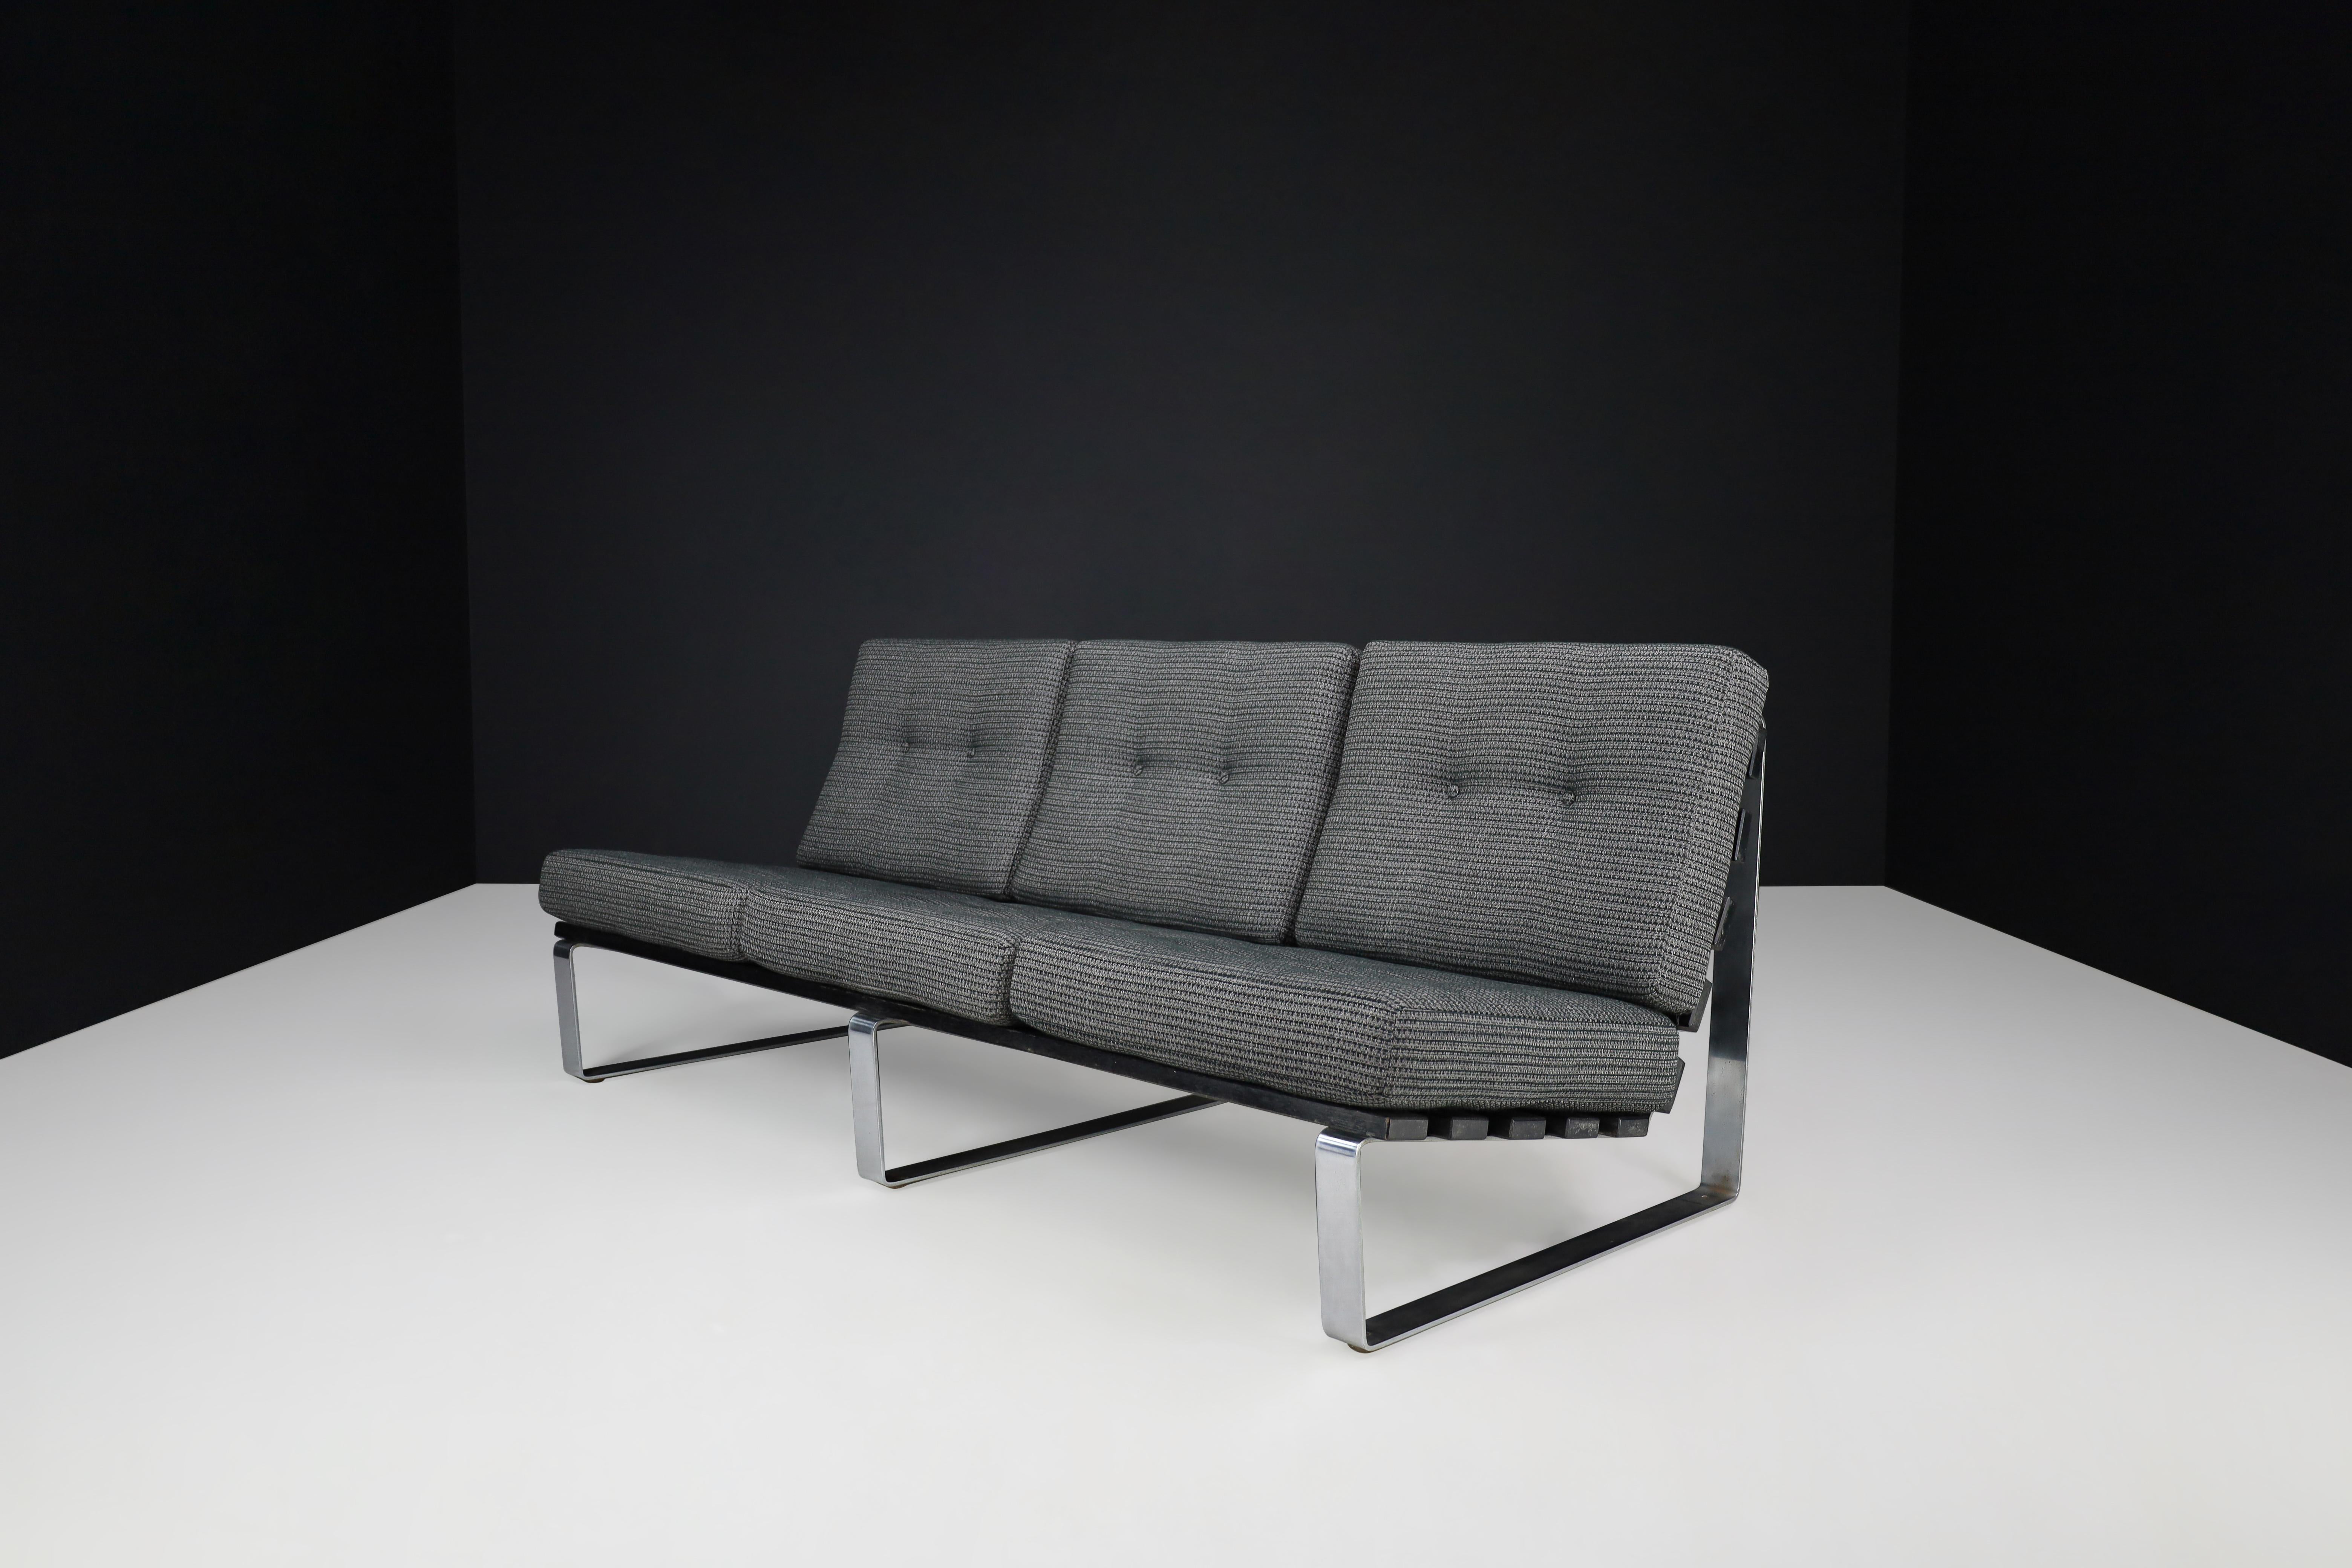 Midcentury Kho Liang Ie for Artifort Bijenkorf Three-seat sofa steel and fabric, The Netherlands, 1960s

The 